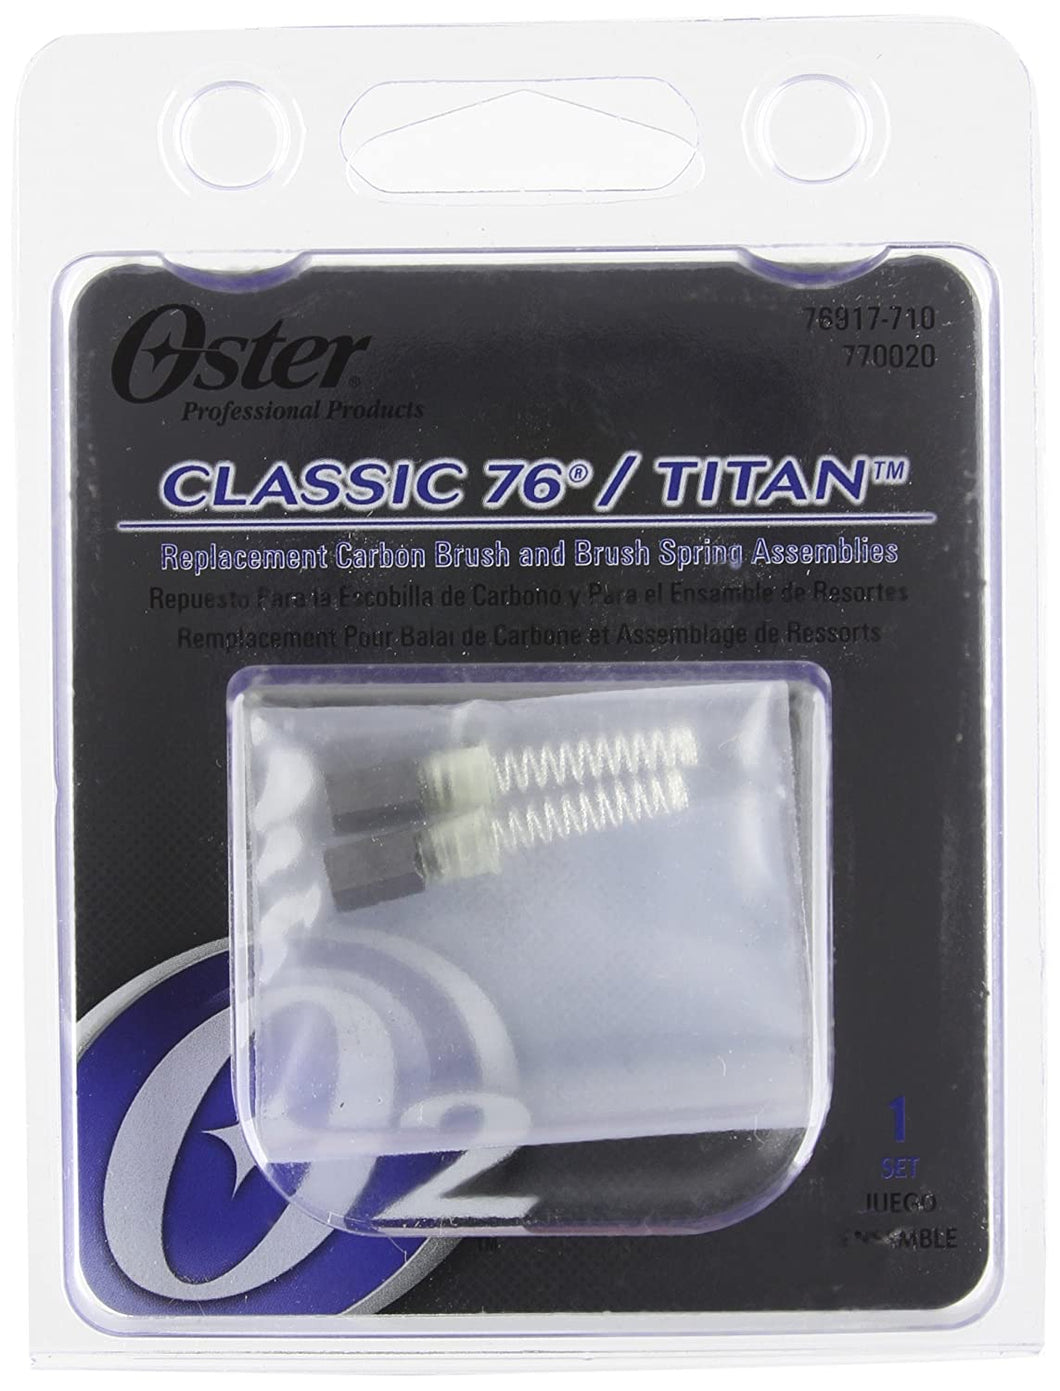 Oster Classic 76/ Titan Replacement Carbon Brush And Brush Spring Assemblies